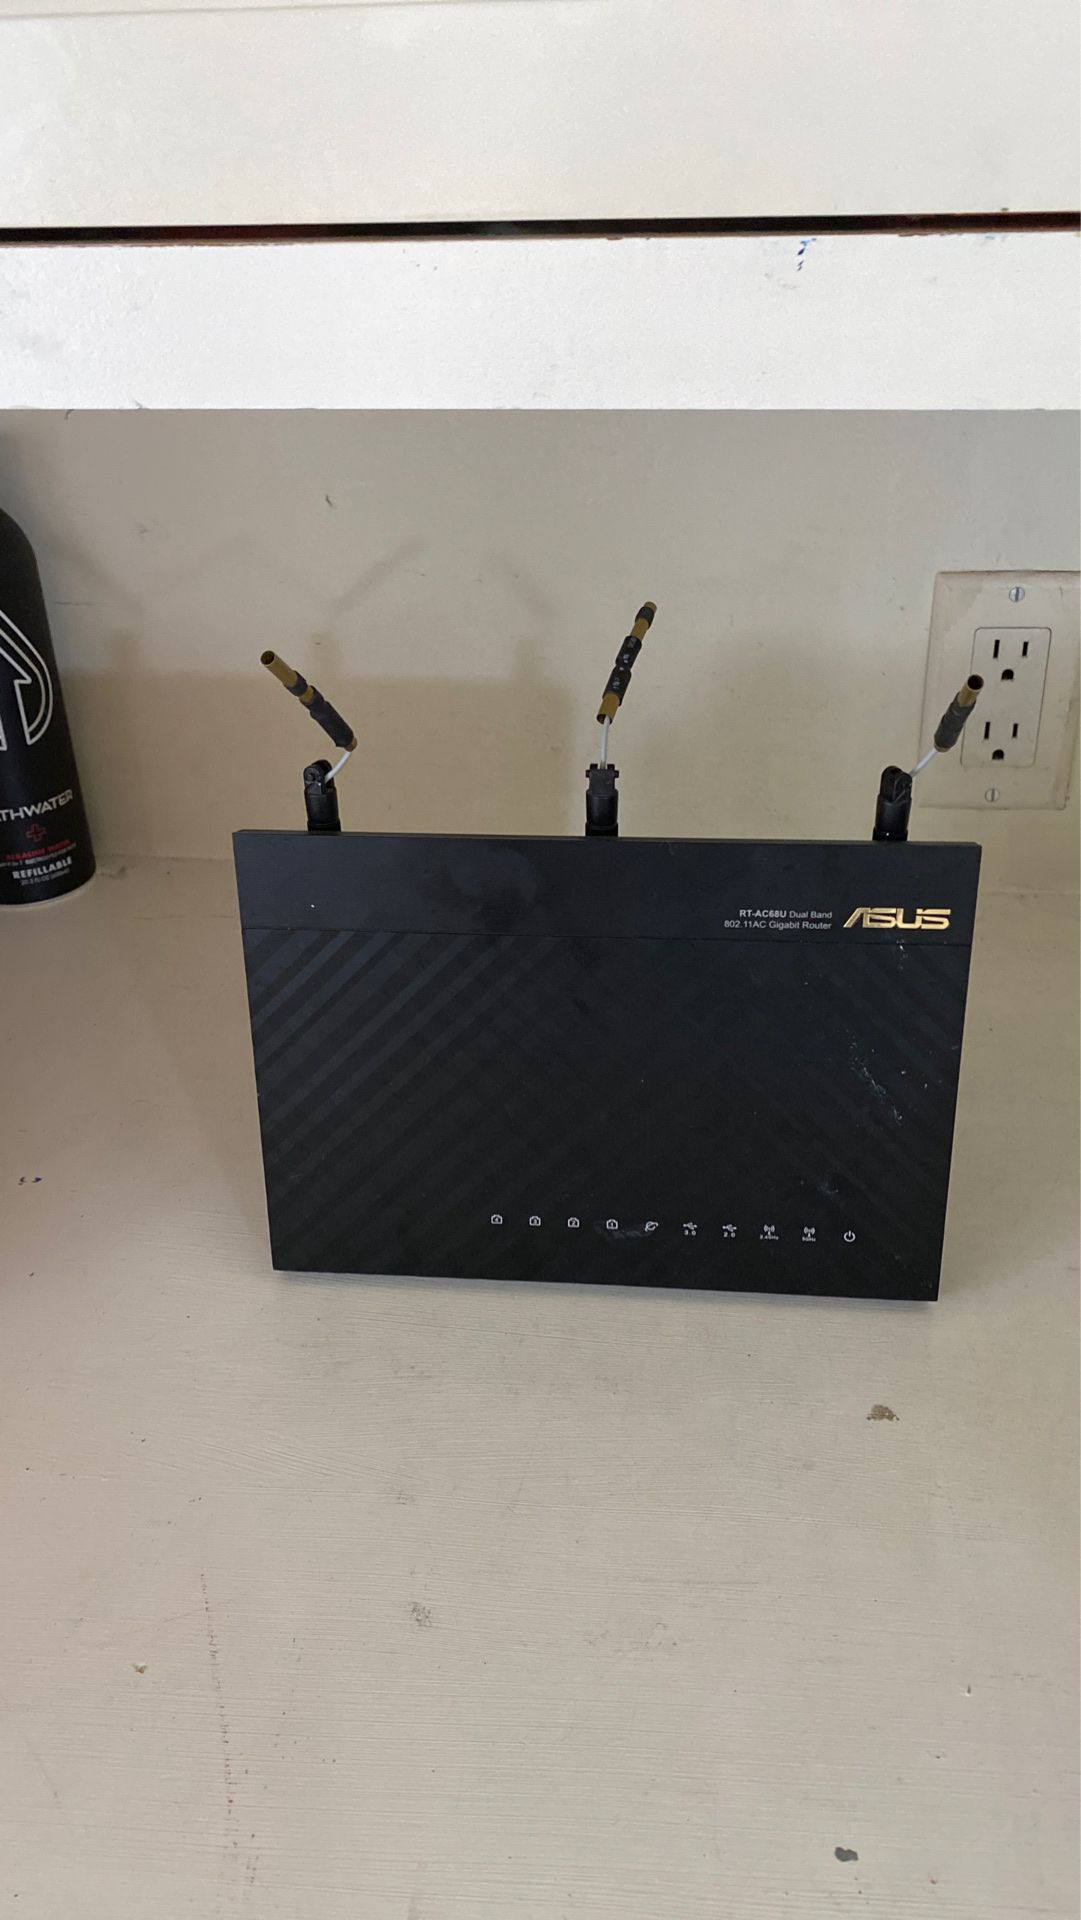 ASUS DUAL BAND WIRELESS GIGABIT ROUTER. MODEL #: ASUS RT-AC68U AC1900 wireless gigabit router